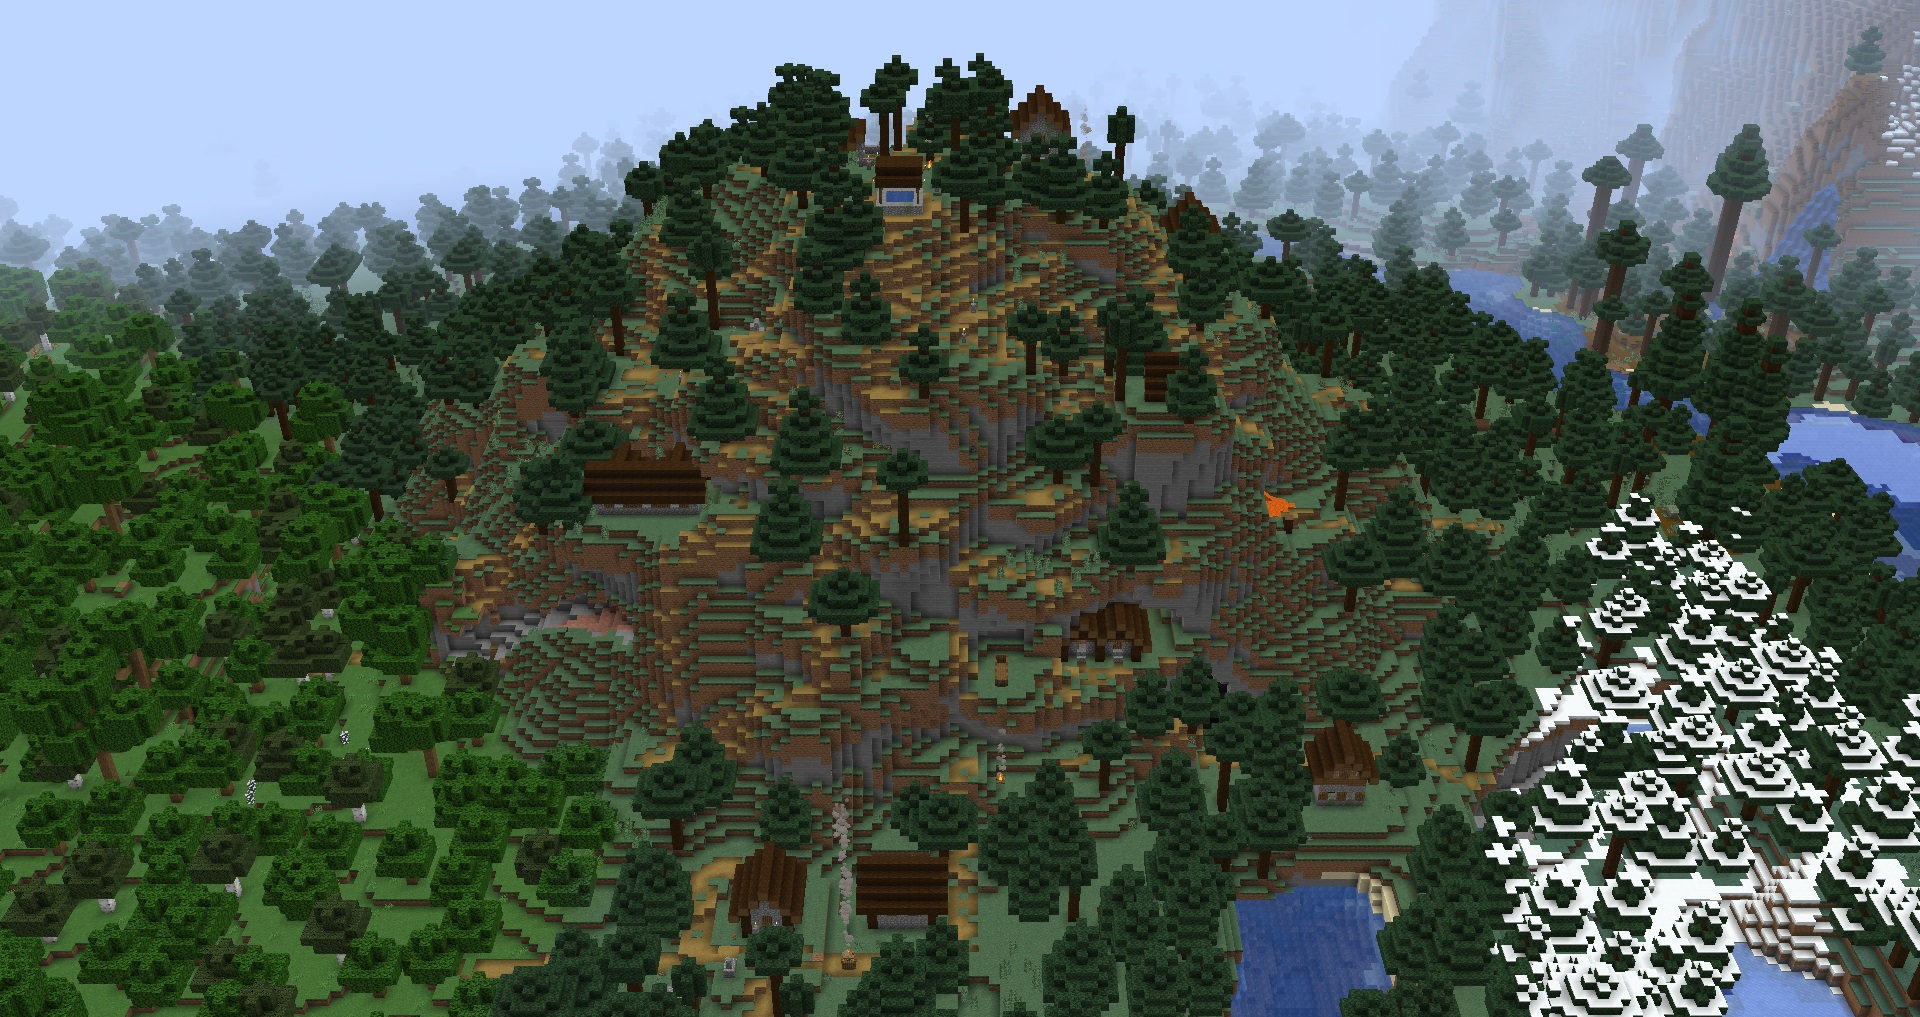 Minecraft - A taiga village that's spawned on a very large hill. Buildings have spawned from the base to the peak of the hill but many buildings are inaccessible by villagers.